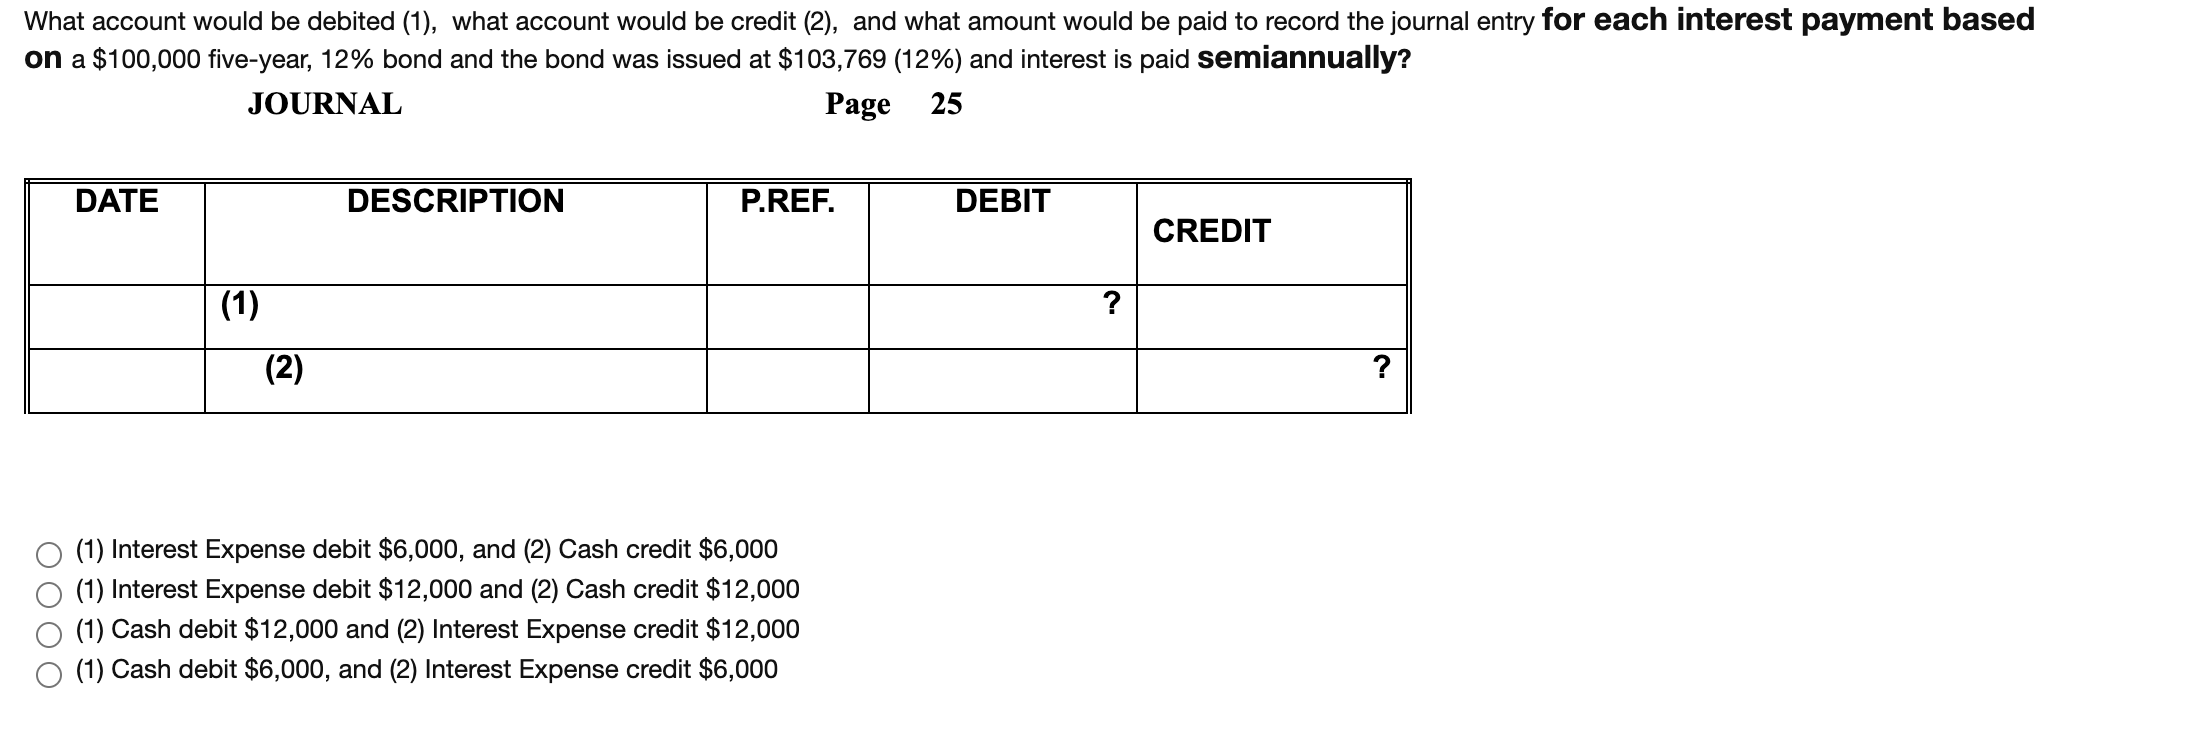 What account would be debited (1), what account would be credit (2), and what amount would be paid to record the journal entry for each interest payment based
on a $100,000 five-year, 12% bond and the bond was issued at $103,769 (12%) and interest is paid semiannually?
JOURNAL
Page
25
DATE
DESCRIPTION
P.REF.
DEBIT
CREDIT
(1)
?
(2)
?
(1) Interest Expense debit $6,000, and (2) Cash credit $6,000
(1) Interest Expense debit $12,000 and (2) Cash credit $12,000
(1) Cash debit $12,000 and (2) Interest Expense credit $12,000
(1) Cash debit $6,000, and (2) Interest Expense credit $6,000
